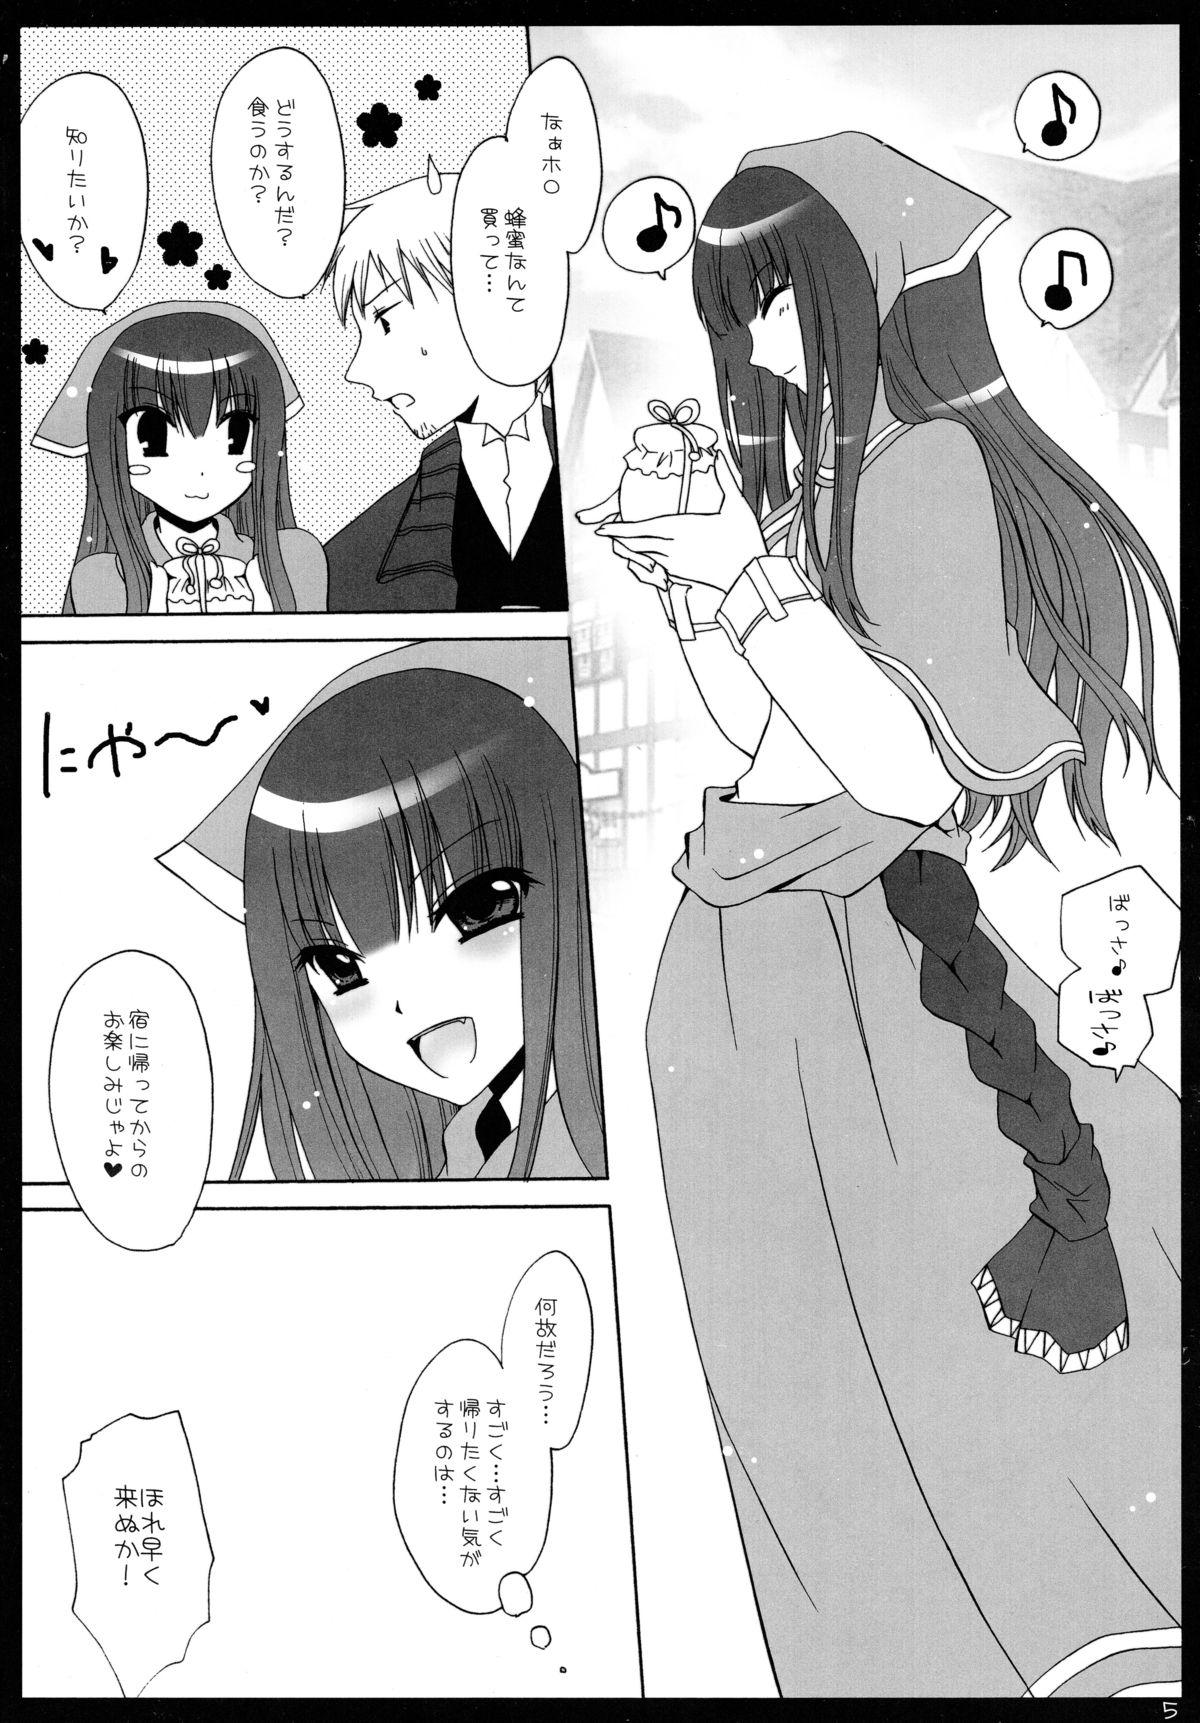 Tits Ookami Shoujo to Hachimitsu Yuugi - Spice and wolf Whipping - Page 5